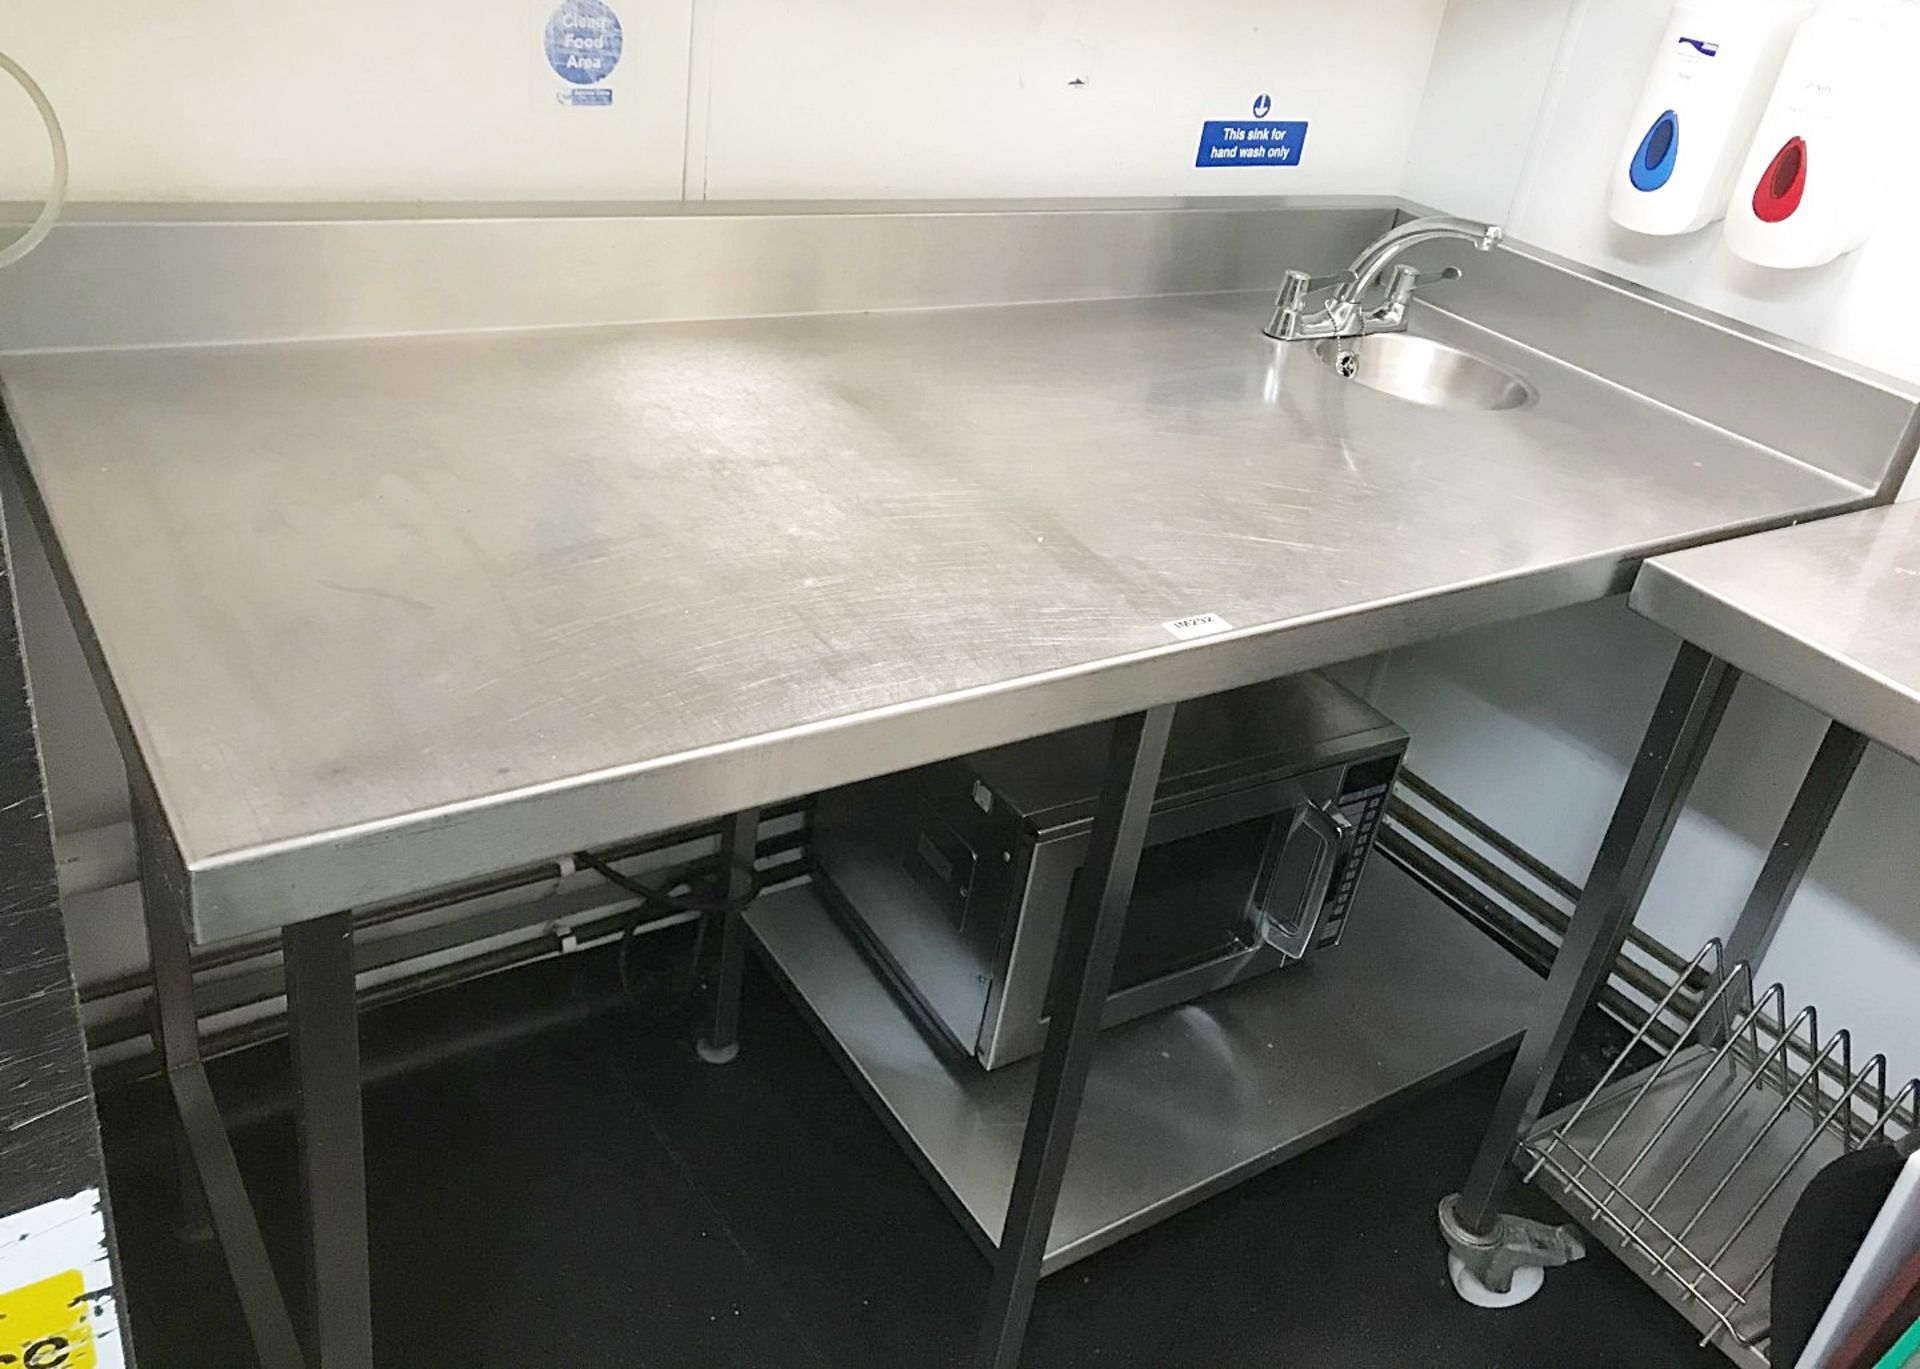 1 x Prep Bench / Wash Station With Basin, Upstand And Undershelf - Ref IM292 - Location: London E1